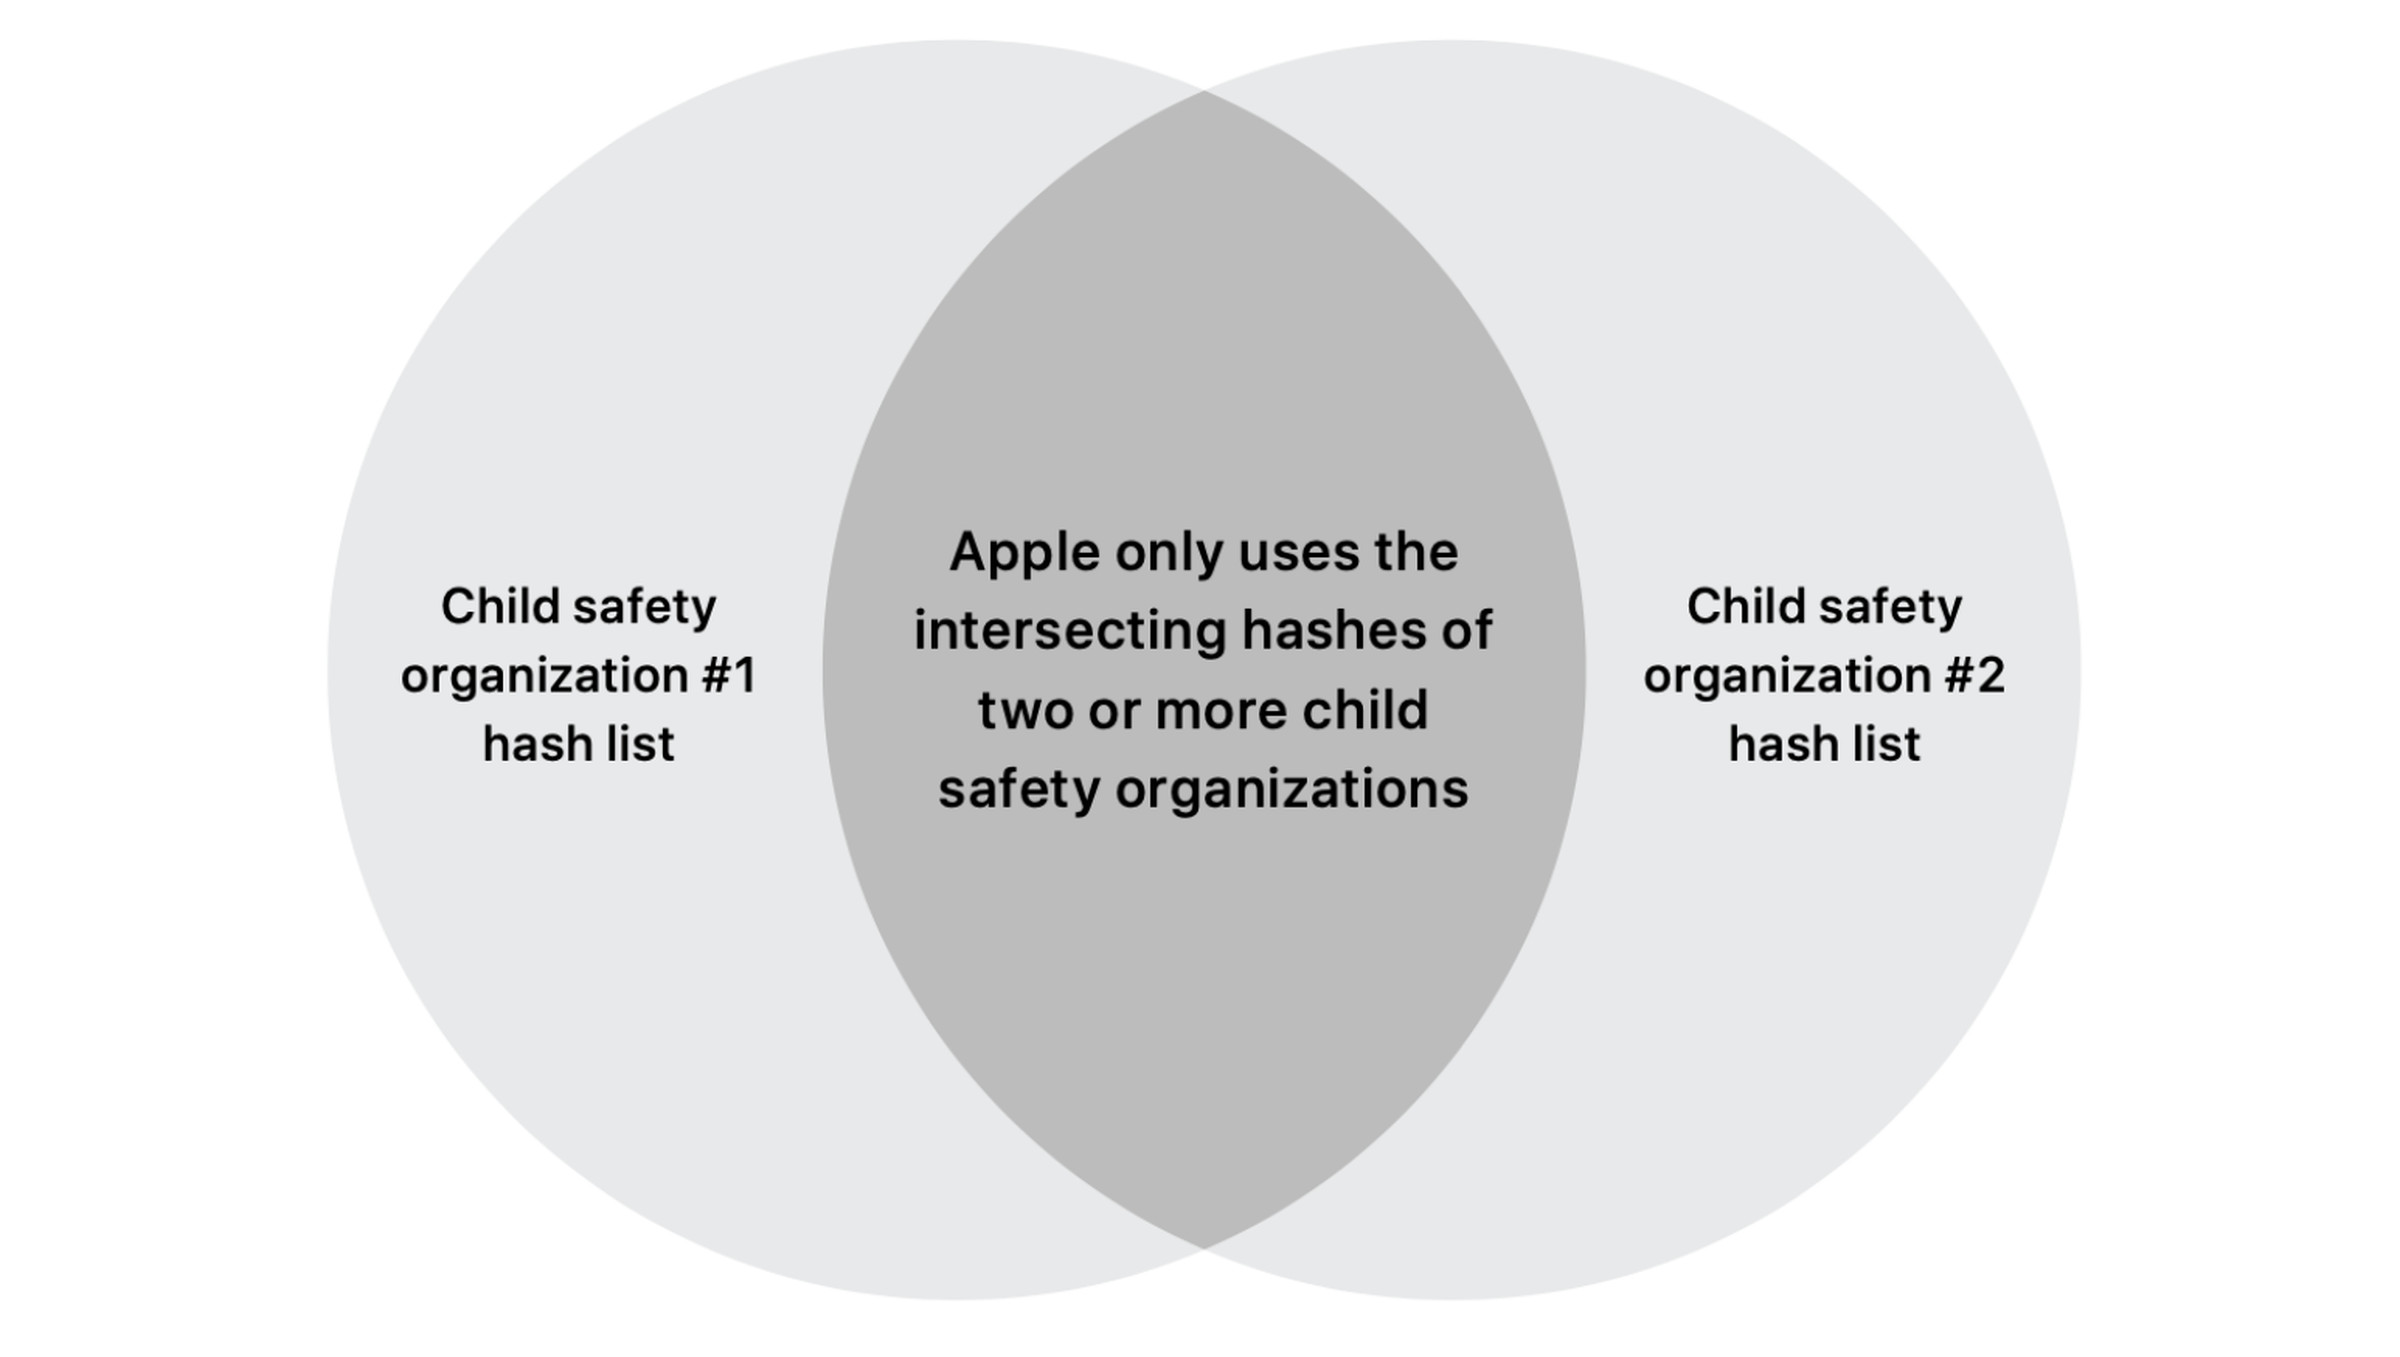 A venn diagram with one circle labeled “Apple Child Safety Organization #1 hash list,” one labeled “Child Safety Organization #2 hash list,” and the overlap labeled “Apple only uses the intersecting hashes of two or more child safety organizations.”